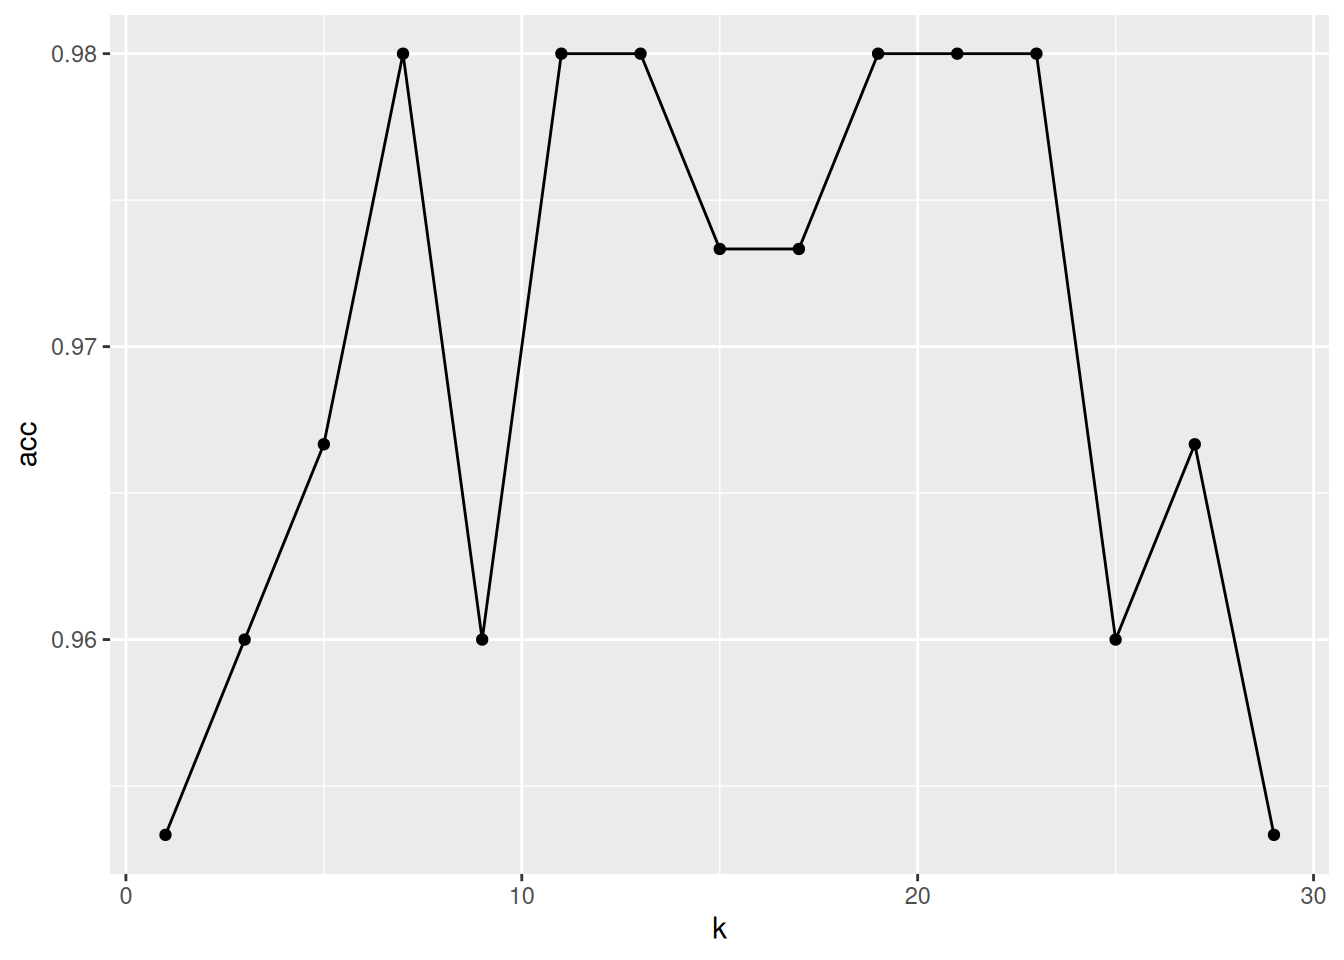 Average classification accuracy as a function of the parameter k.